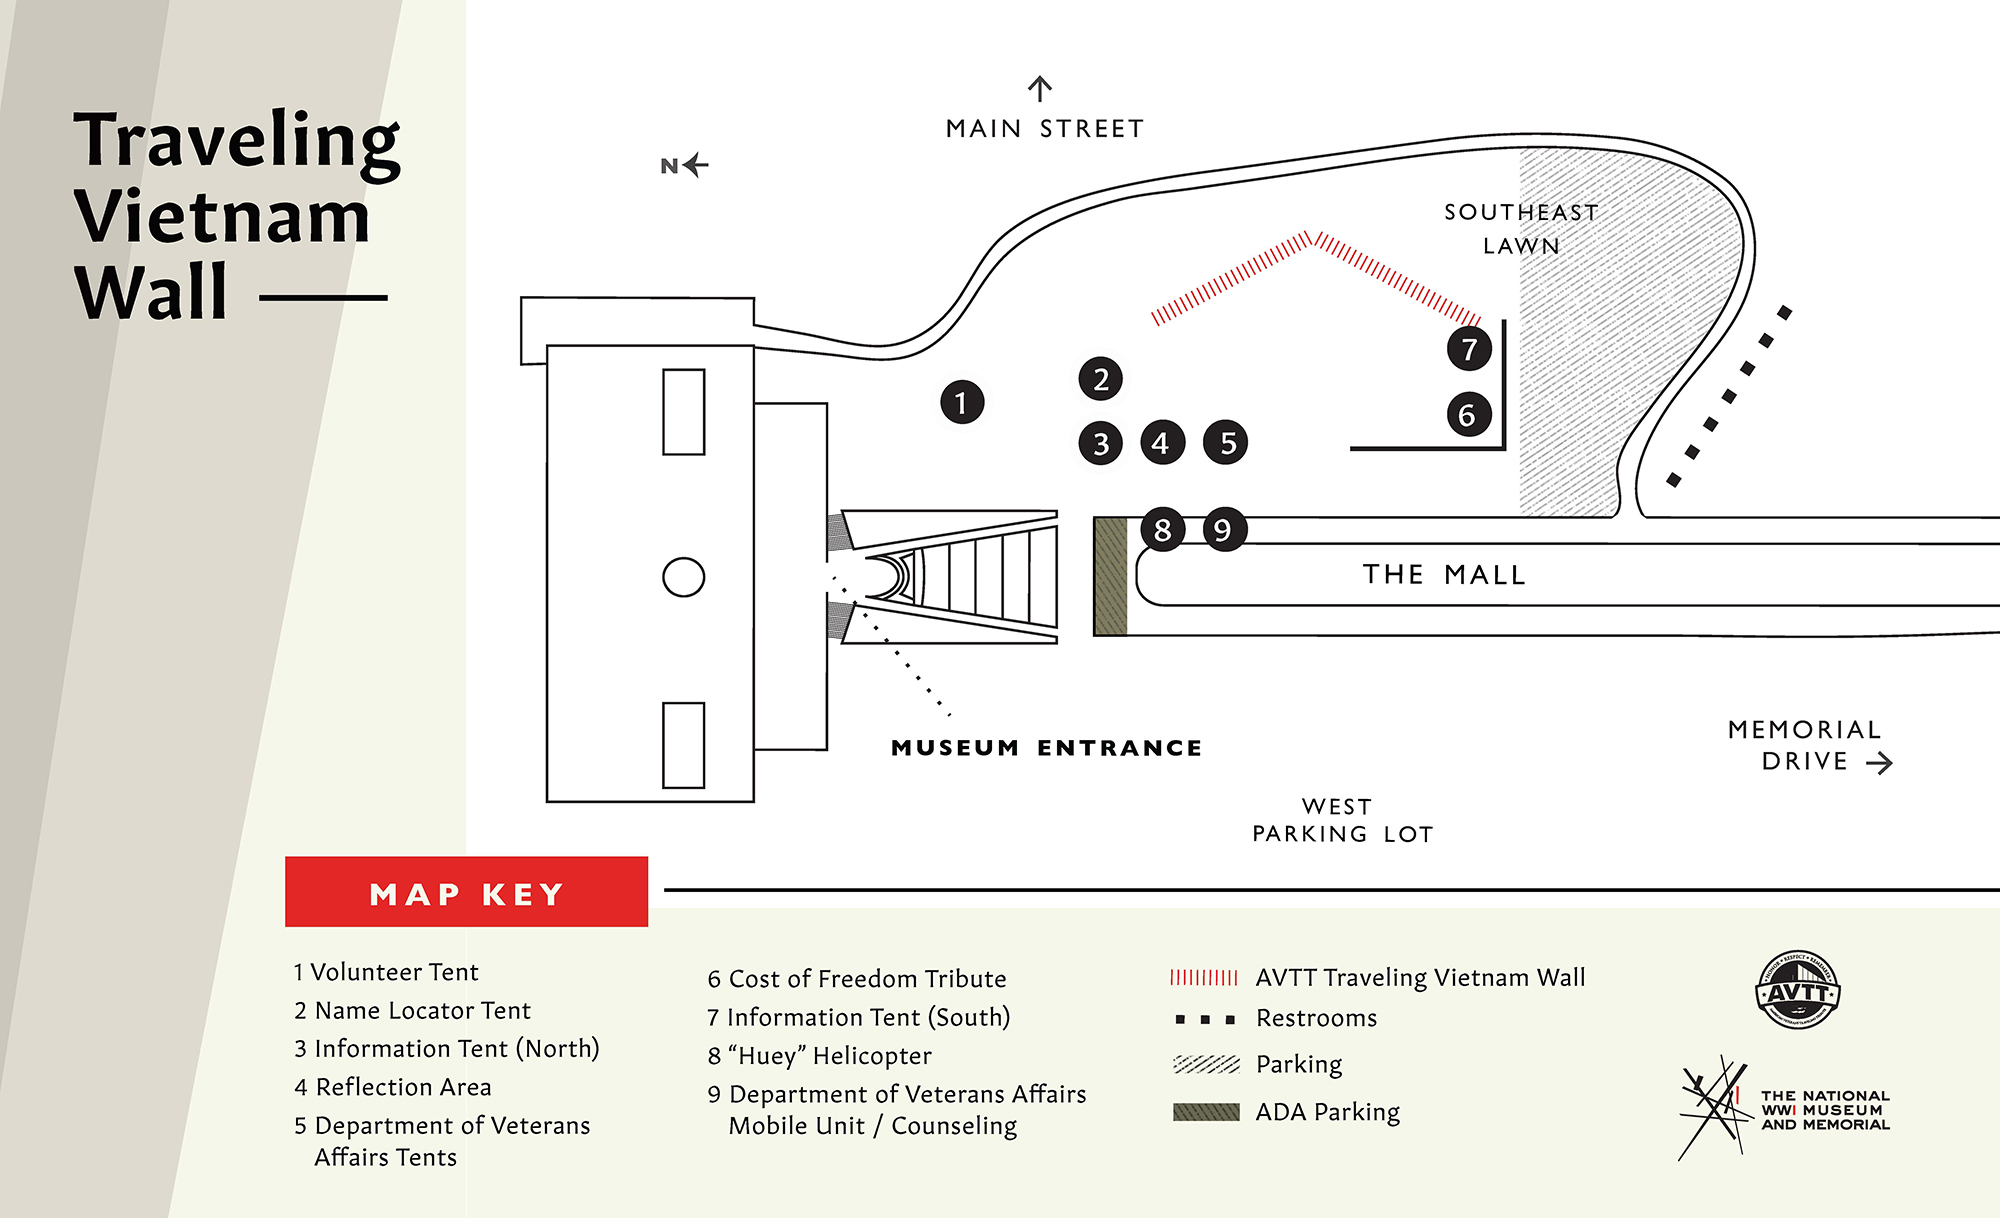 Map of the grounds with the Vietnam Wall on the Southeast Lawn